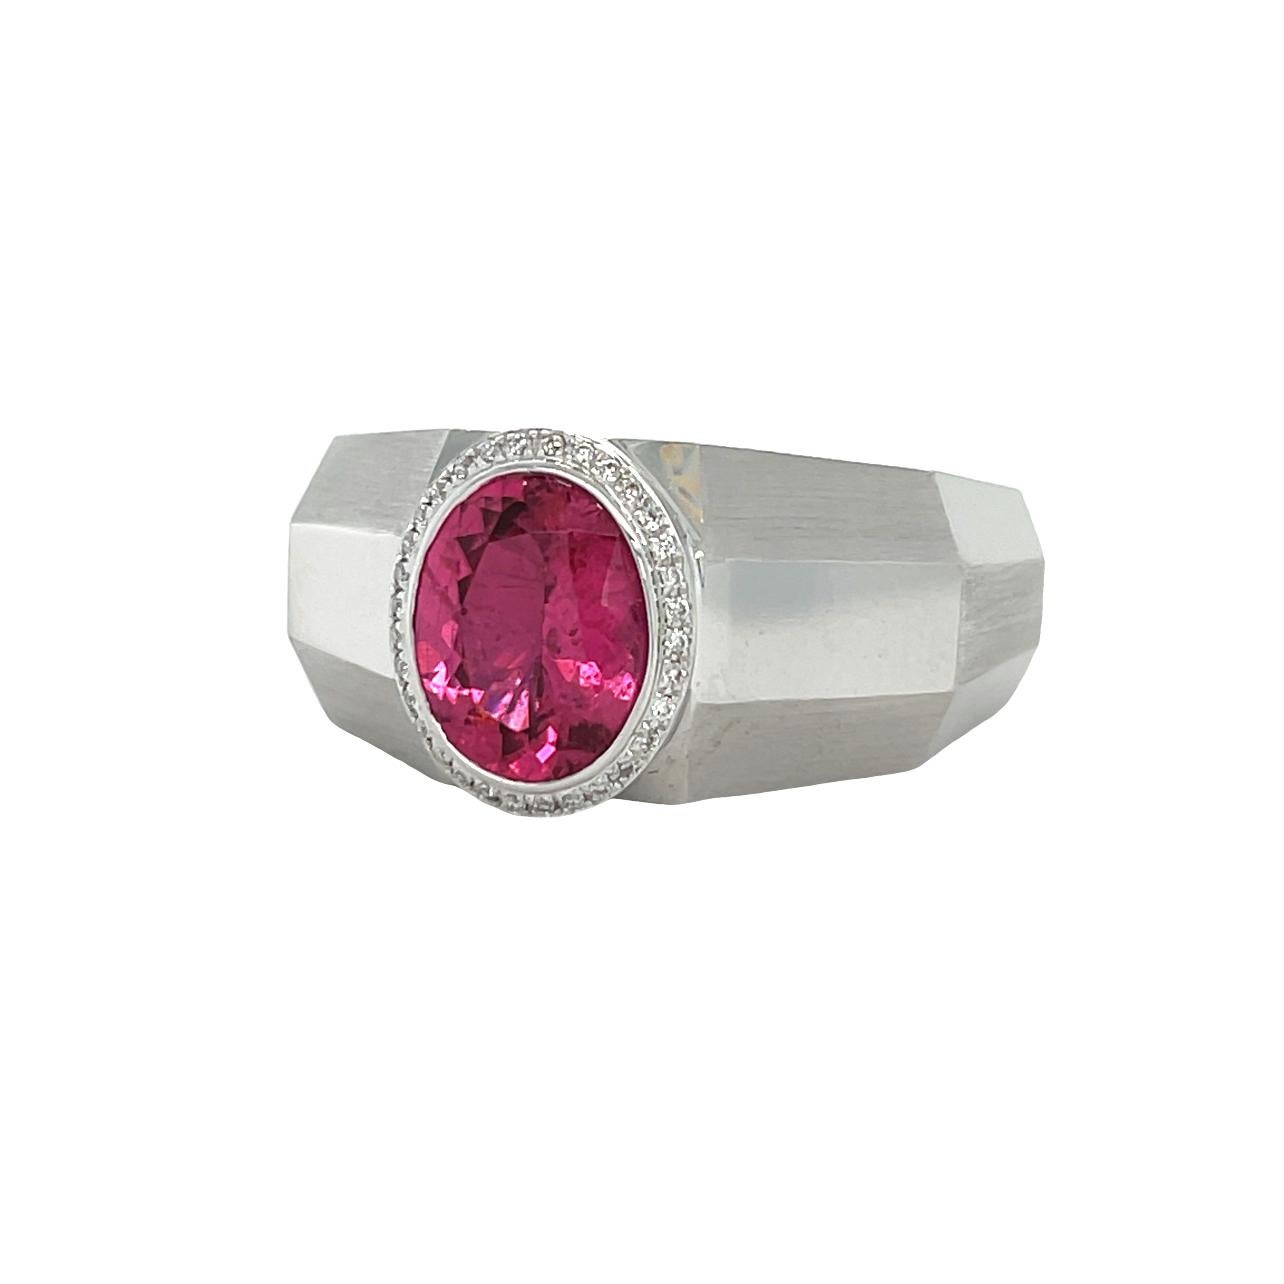 This unique Men's ring has a vibrant pink 10x8 mm Oval shaped African Spinel surrounded by top quality brilliant cut diamonds. The center stone is bezel set in 14K white and gold. It comes in a beautiful box ready for the perfect gift!
Size: US